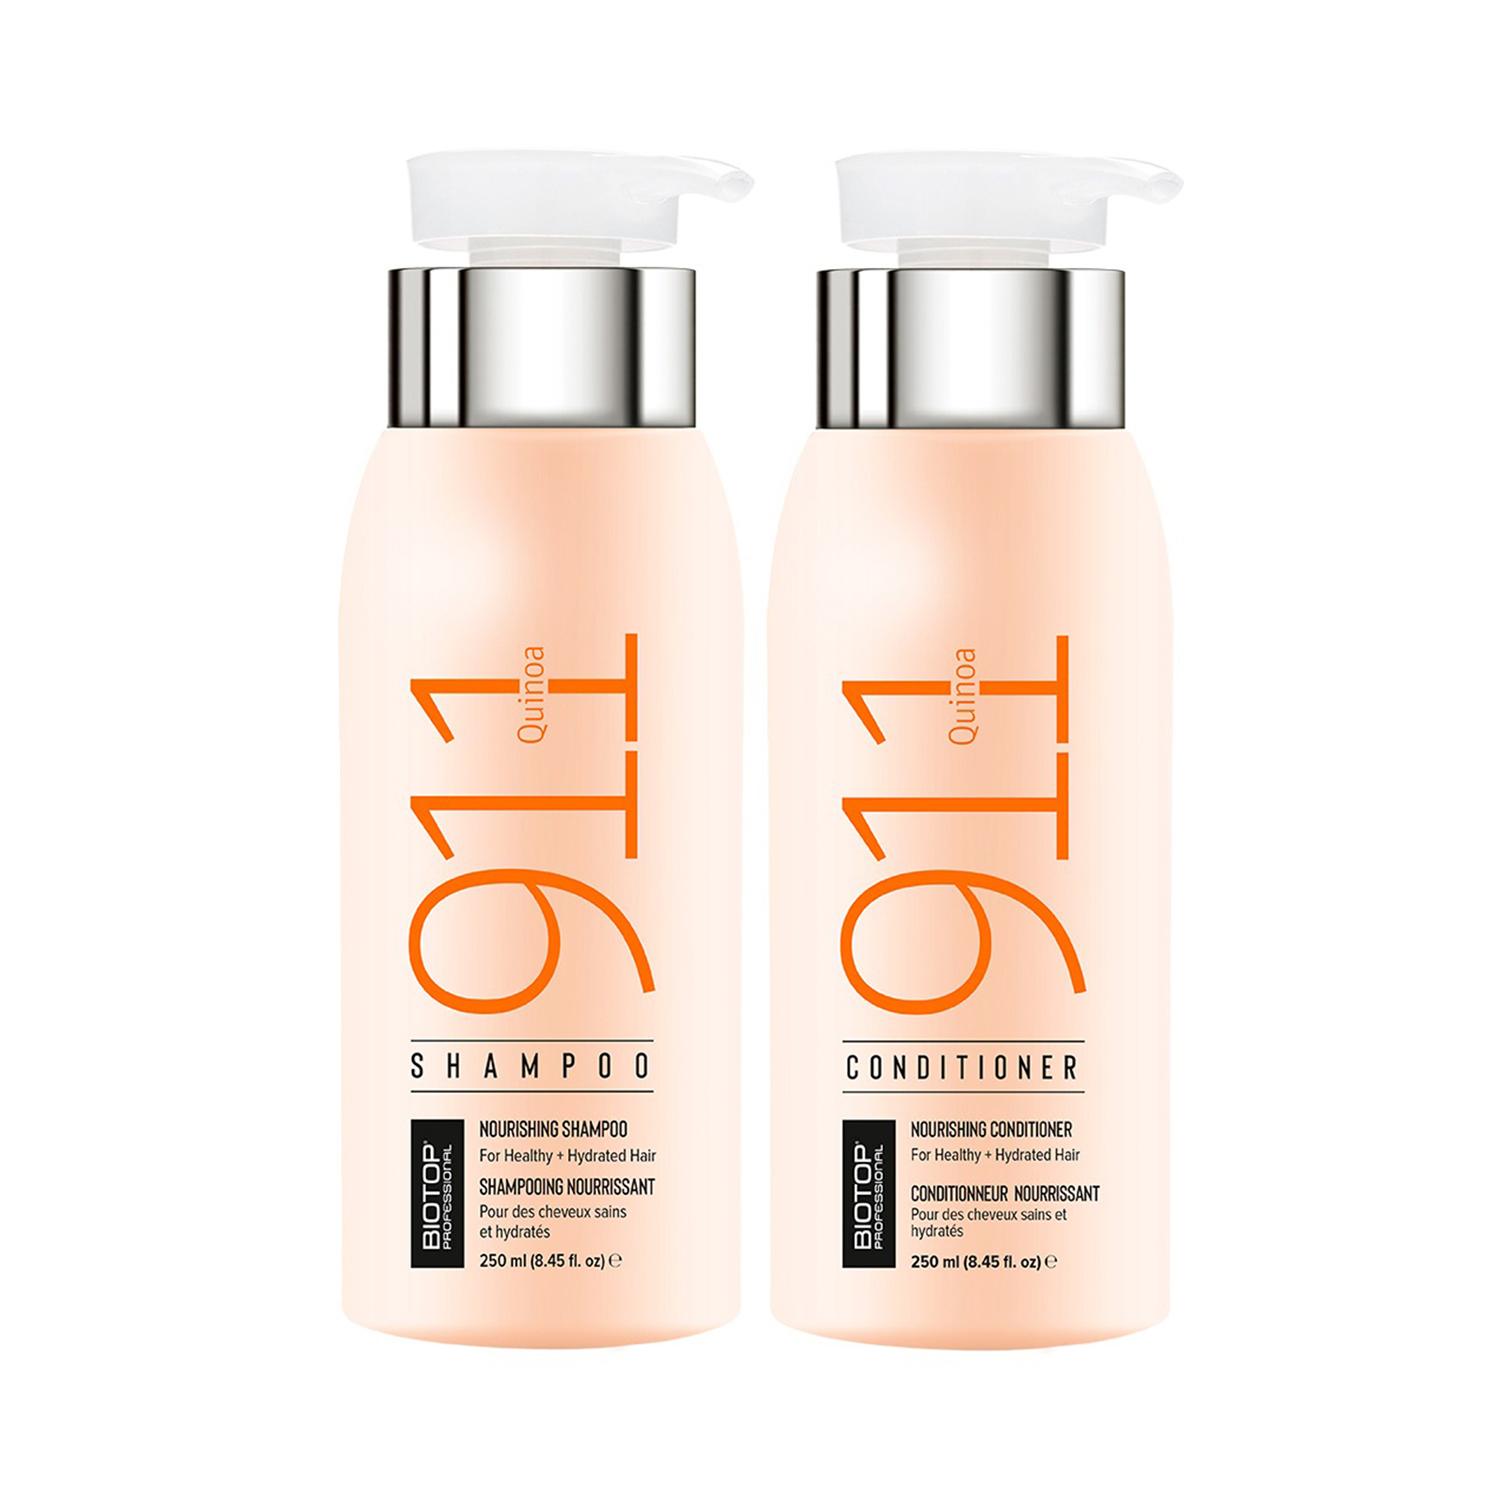 Biotop Professional | Biotop Professional 911 Shampoo & Conditioner Quinoa (250ml) Each (Pack of 2) Combo